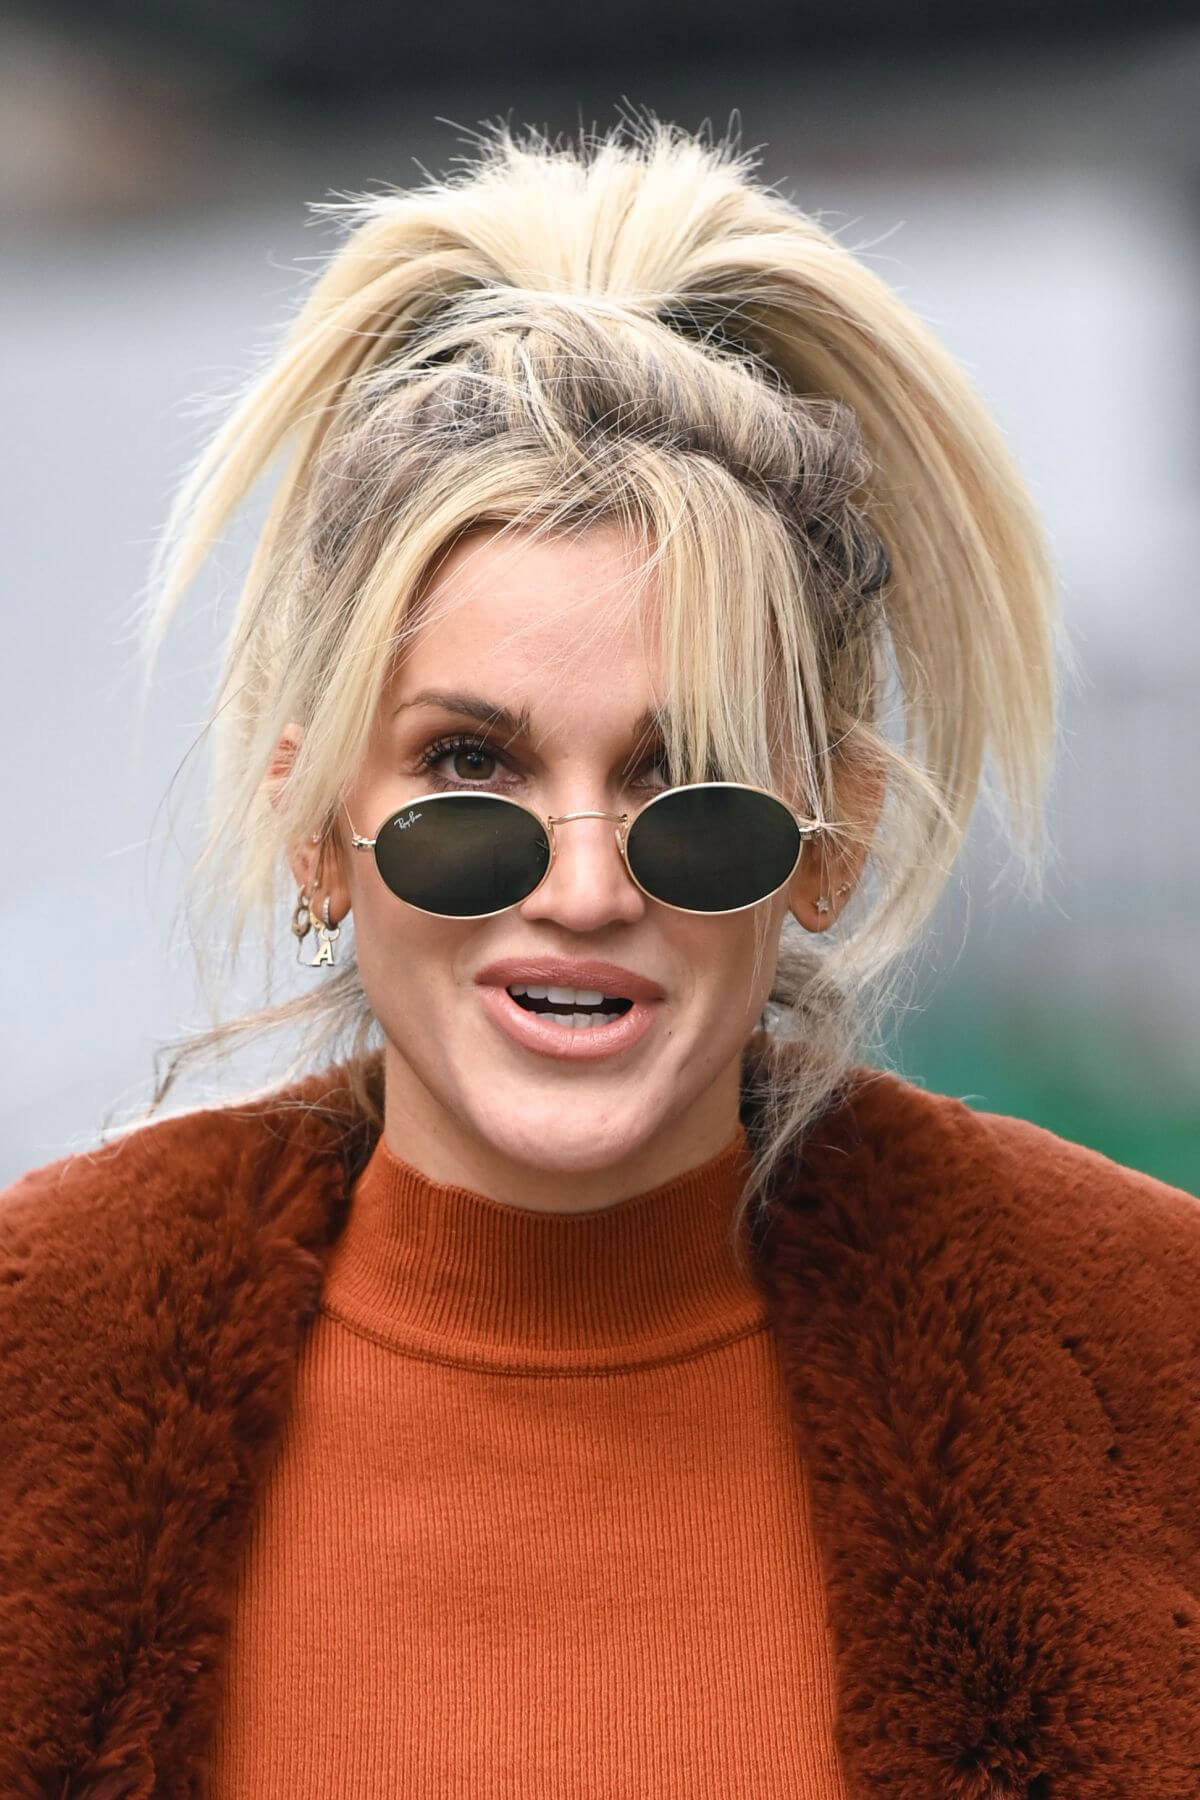 Ashley Roberts seen in Rust Color Dress Arrives at Heart Radio in London 11/24/2020